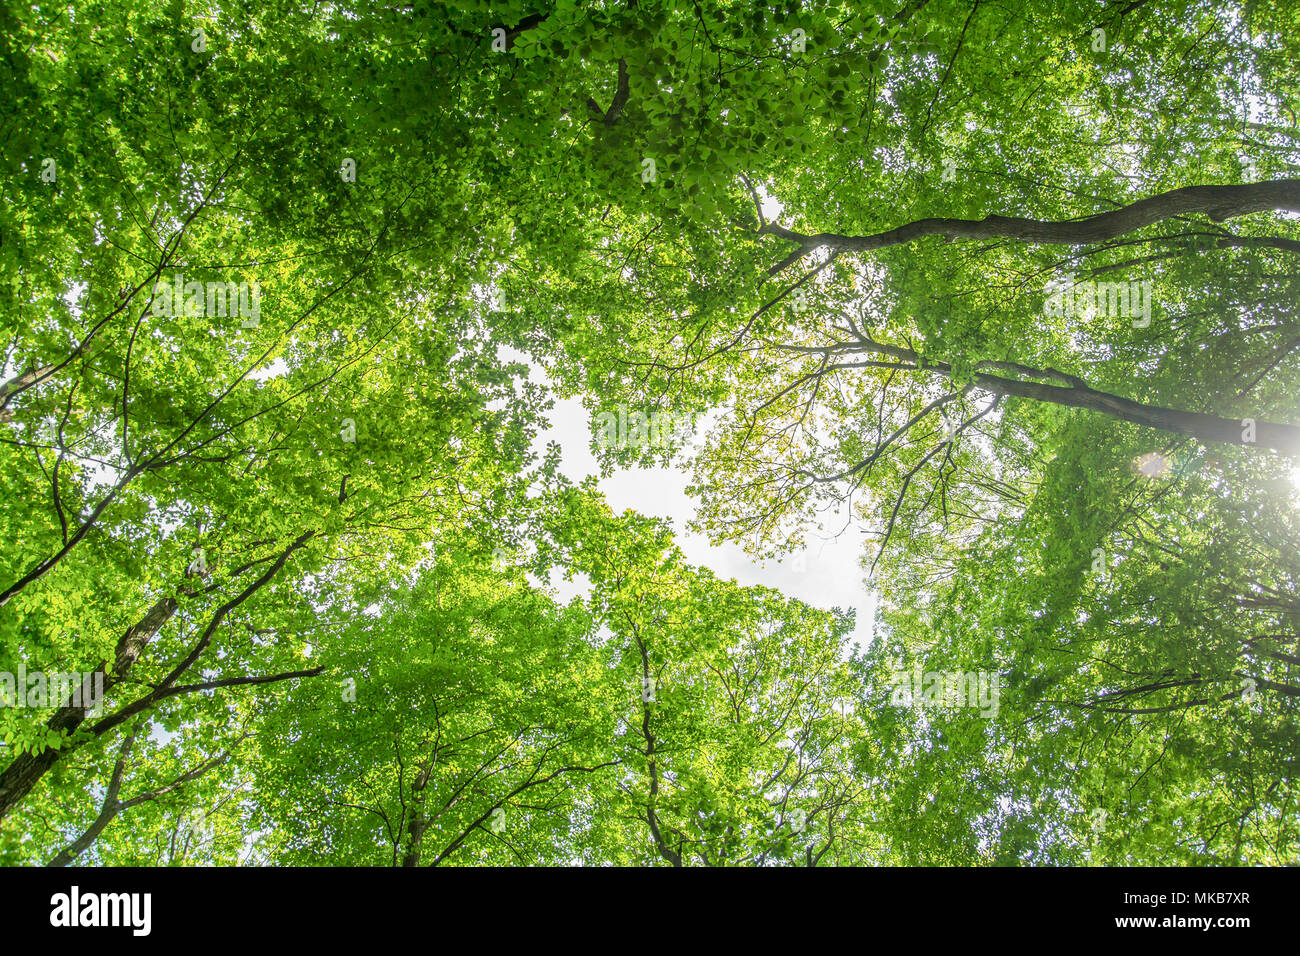 green leaves tree canopy low angle view Stock Photo